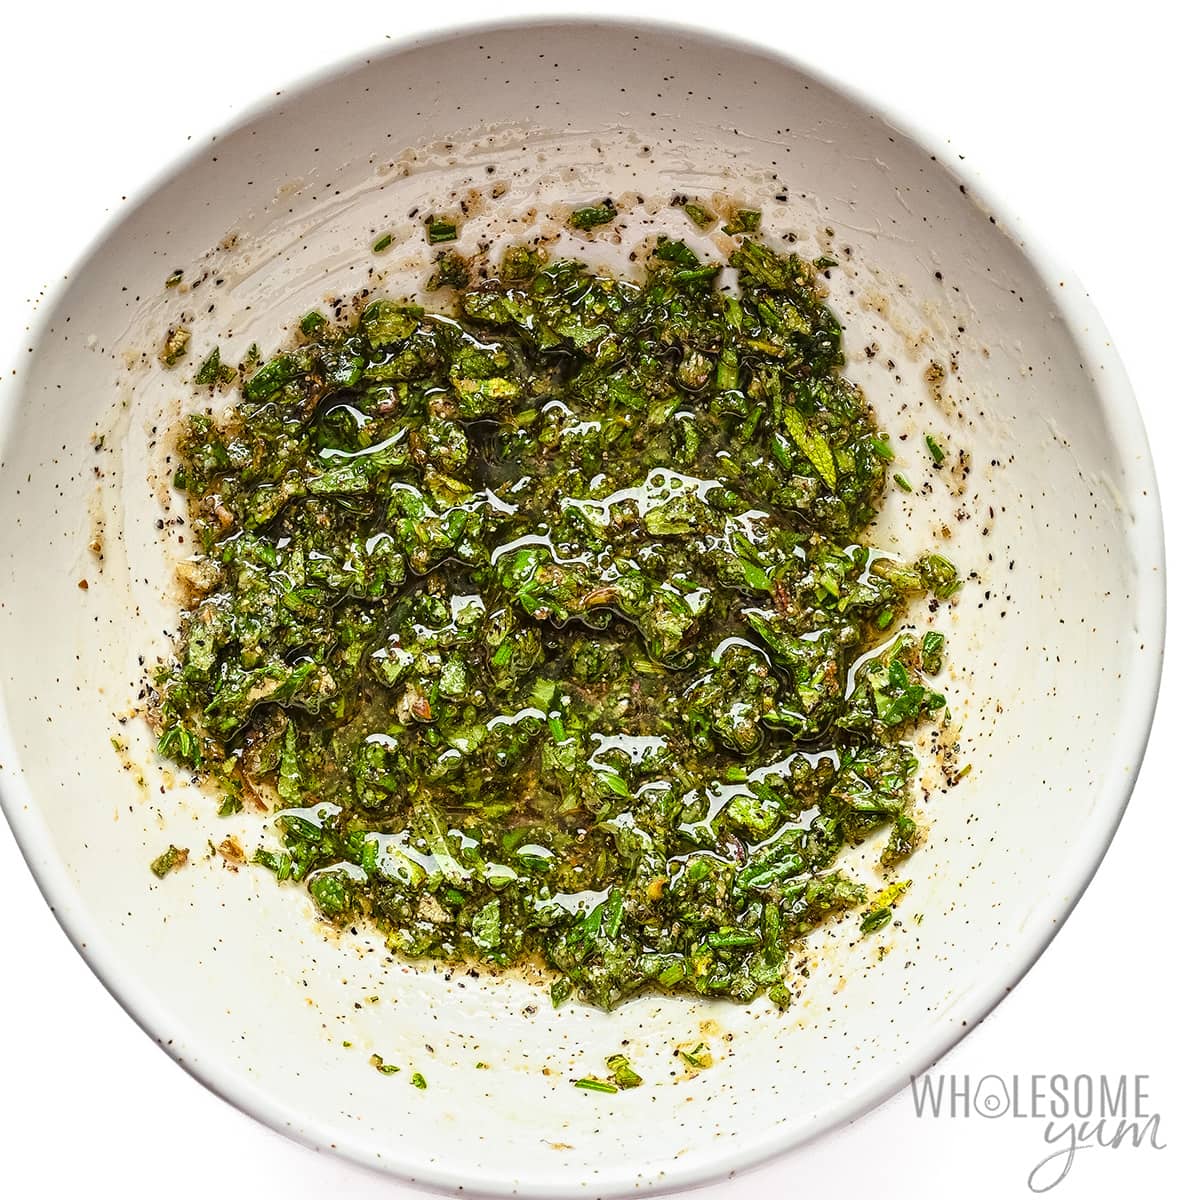 Olive oil, herbs, and spices mixed together in a bowl.